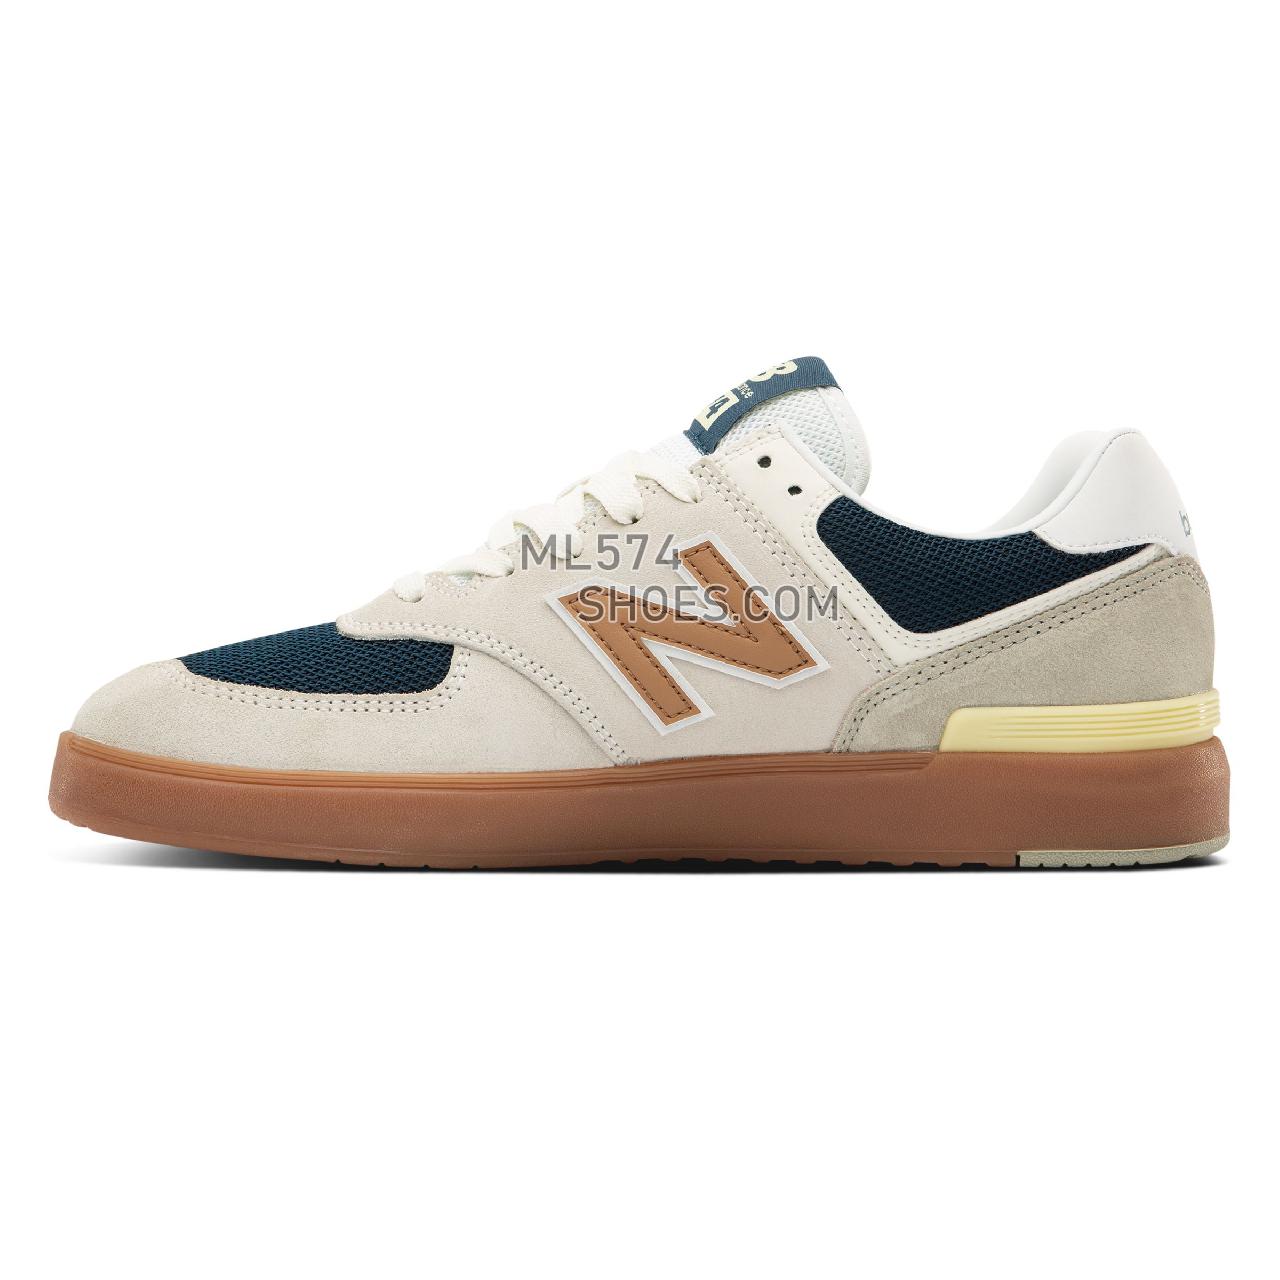 New Balance All Coasts AM574 - Men's Court Classics - White with Gold - AM574WYG